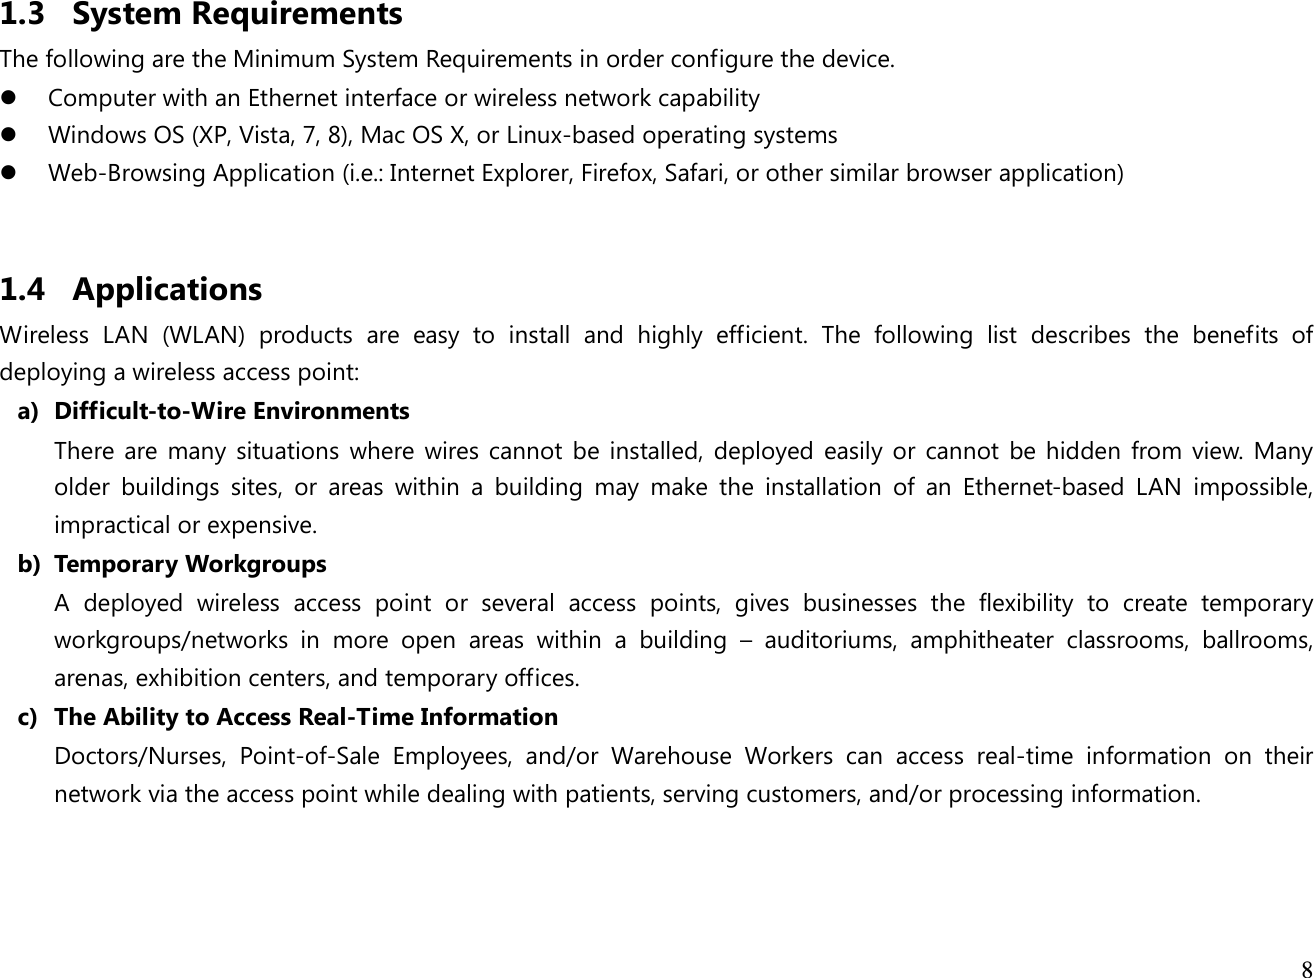  8  1.3 System Requirements The following are the Minimum System Requirements in order configure the device.  Computer with an Ethernet interface or wireless network capability  Windows OS (XP, Vista, 7, 8), Mac OS X, or Linux-based operating systems  Web-Browsing Application (i.e.: Internet Explorer, Firefox, Safari, or other similar browser application)  1.4 Applications Wireless  LAN  (WLAN)  products  are  easy  to  install  and  highly  efficient.  The  following  list  describes  the  benefits  of deploying a wireless access point: a) Difficult-to-Wire Environments There are many situations where wires cannot be installed,  deployed easily or  cannot be hidden from view. Many older  buildings  sites,  or  areas  within  a  building  may  make  the  installation  of  an  Ethernet-based  LAN  impossible, impractical or expensive. b) Temporary Workgroups A  deployed  wireless  access  point  or  several  access  points,  gives  businesses  the  flexibility  to  create  temporary workgroups/networks  in  more  open  areas  within  a  building  –  auditoriums,  amphitheater  classrooms,  ballrooms, arenas, exhibition centers, and temporary offices. c) The Ability to Access Real-Time Information Doctors/Nurses,  Point-of-Sale  Employees,  and/or  Warehouse  Workers  can  access  real-time  information  on  their network via the access point while dealing with patients, serving customers, and/or processing information.    